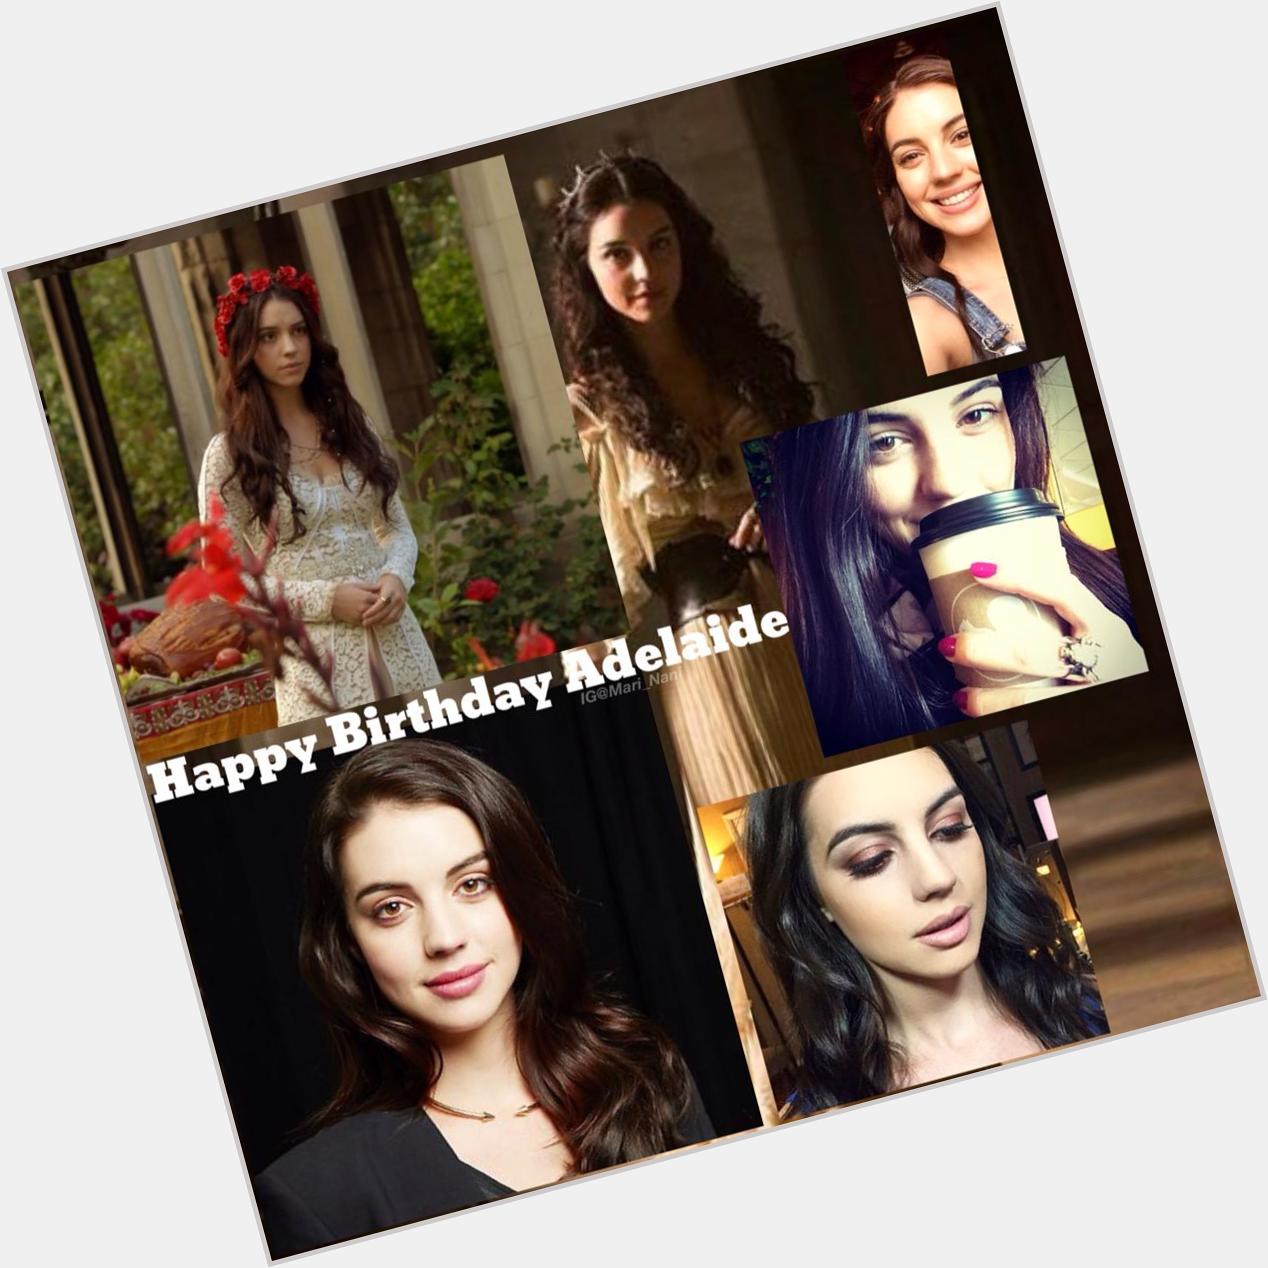  happy birthday to the one and only Adelaide Kane ! Our Queen Mary!hope your having an amazing day!    